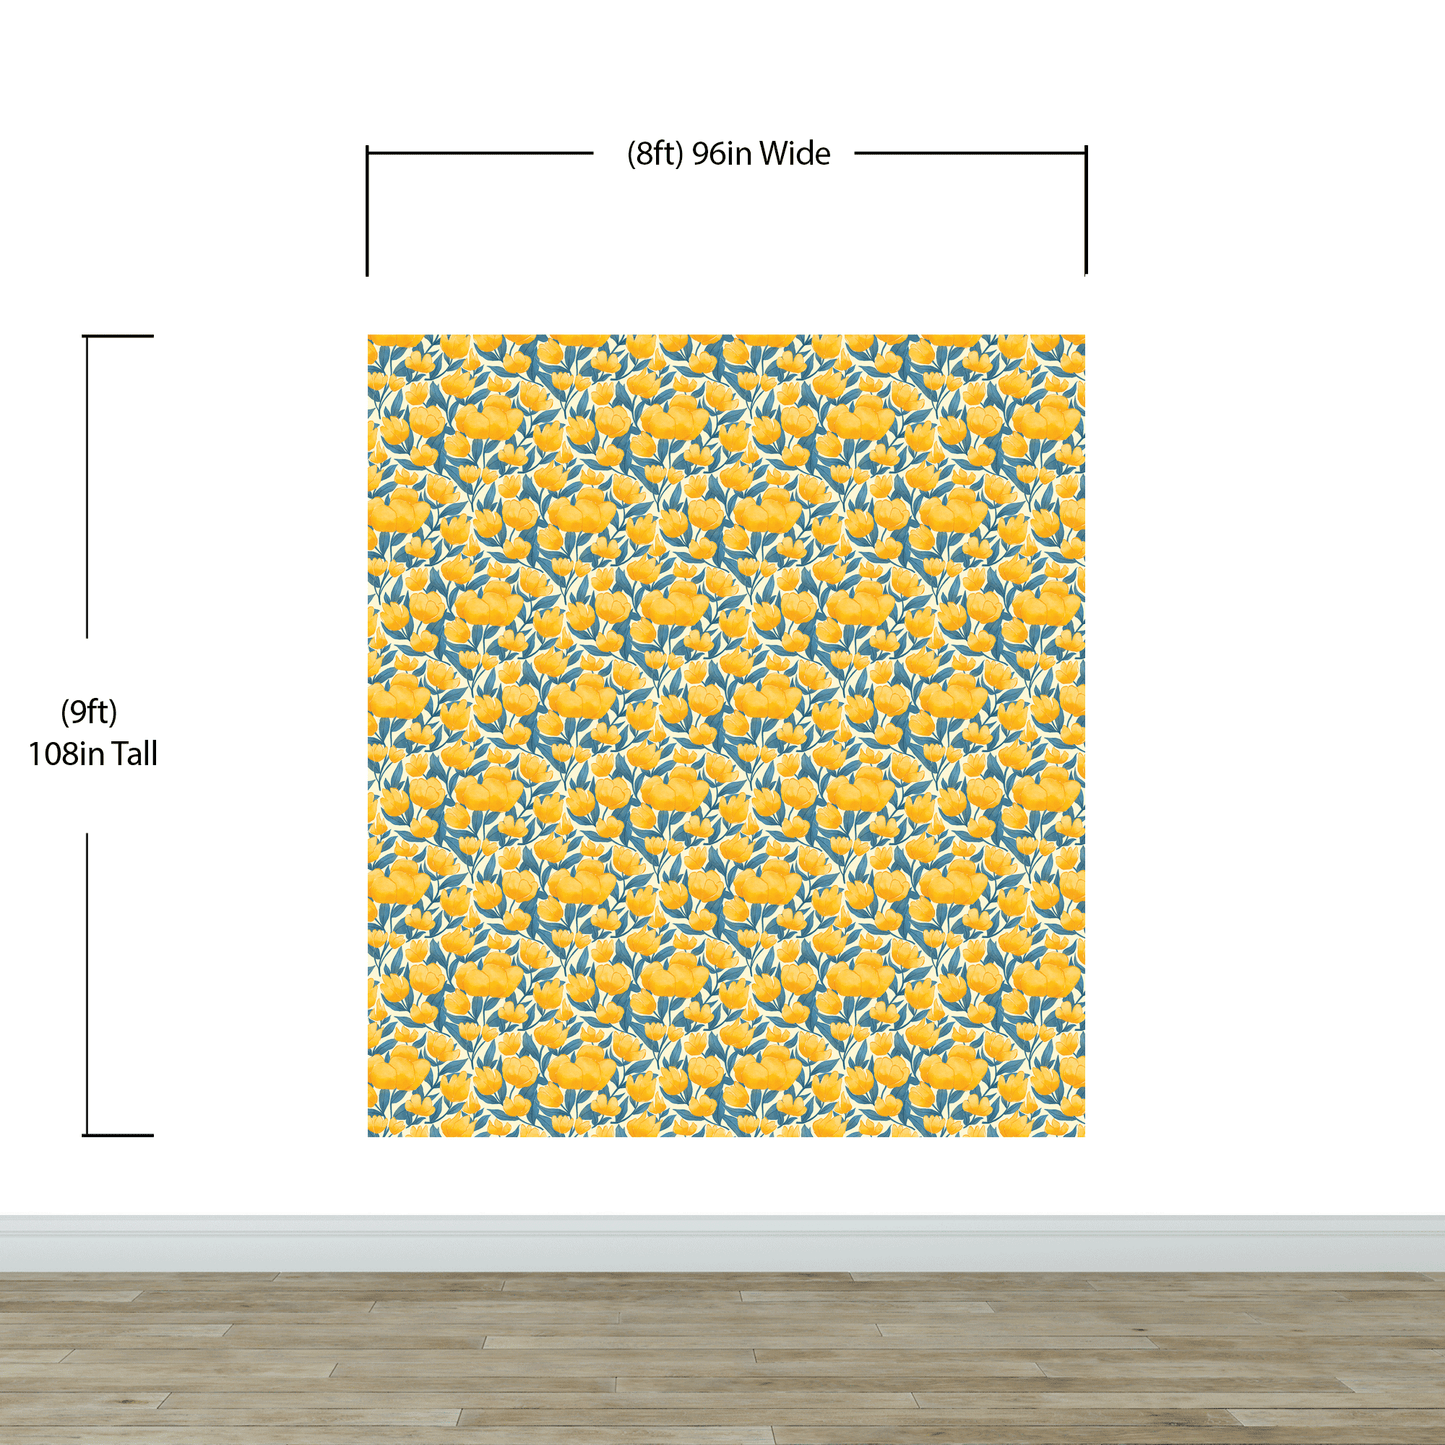 Yellow Floral Flower Background Pattern Wall Mural. #6456